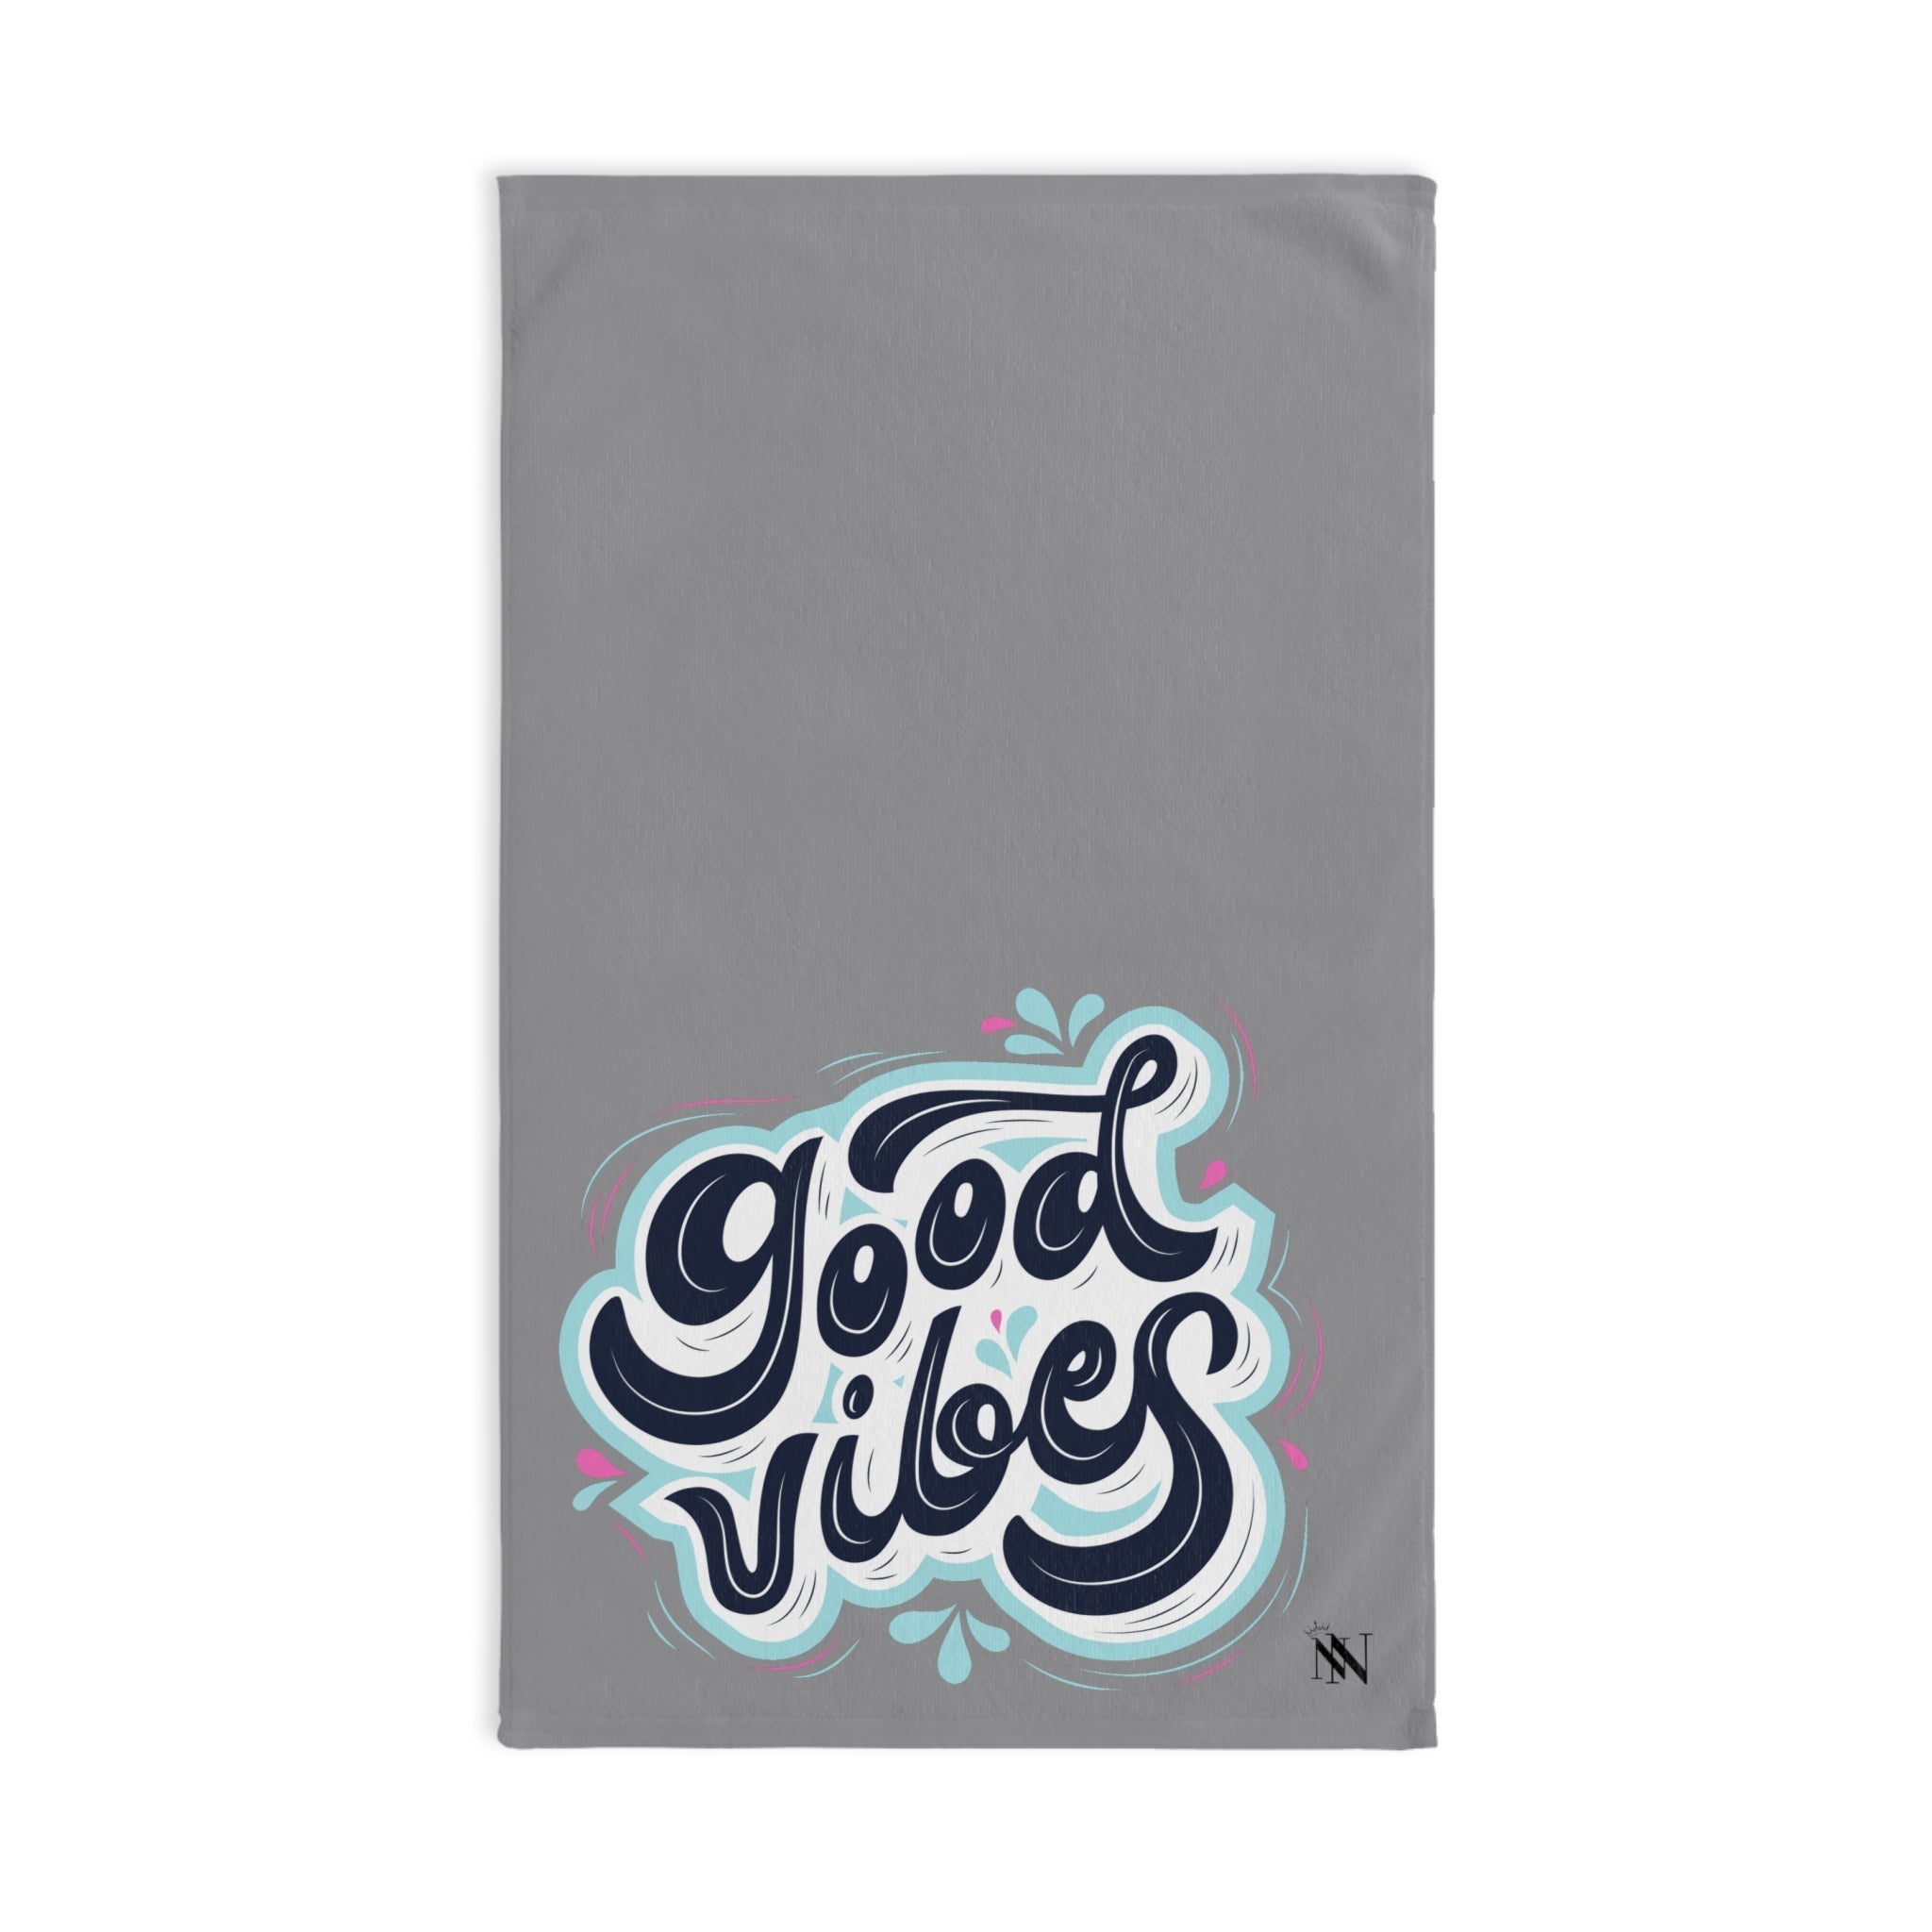 Splash Good Vibes Grey | Anniversary Wedding, Christmas, Valentines Day, Birthday Gifts for Him, Her, Romantic Gifts for Wife, Girlfriend, Couples Gifts for Boyfriend, Husband NECTAR NAPKINS